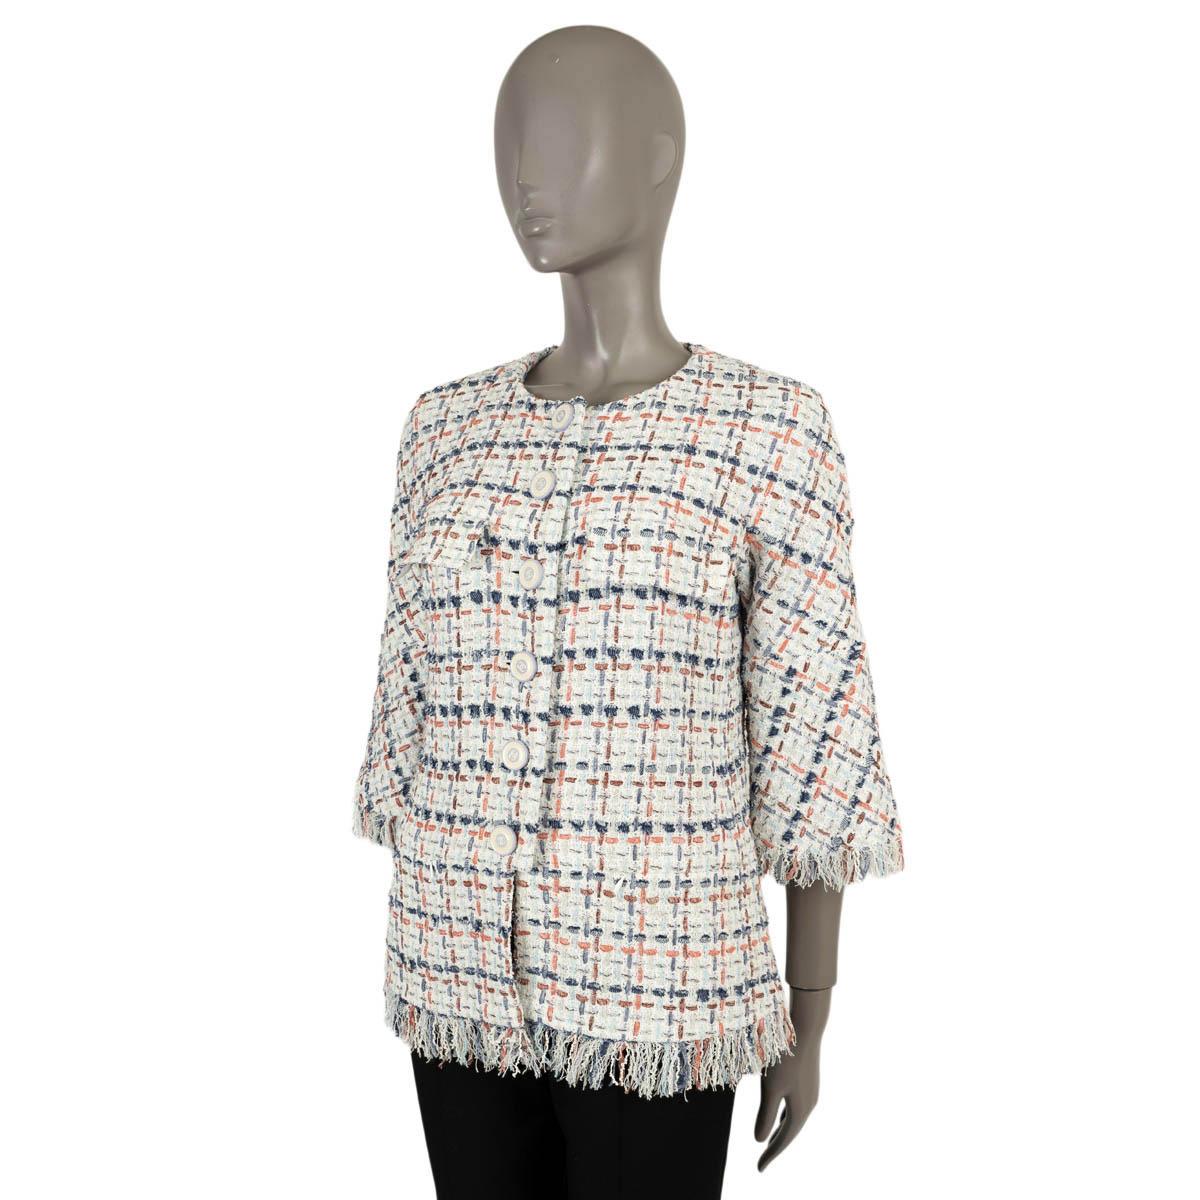 100% authentic Chanel collarless tweed jacket in white, blue, red and green cotton (35%), polyamide (28%), acrylic (26%) and linen (11%). Features fringe trims, 3/4 sleeves and two flap pocket at the chest. Opens with enamelled CC buttons on the